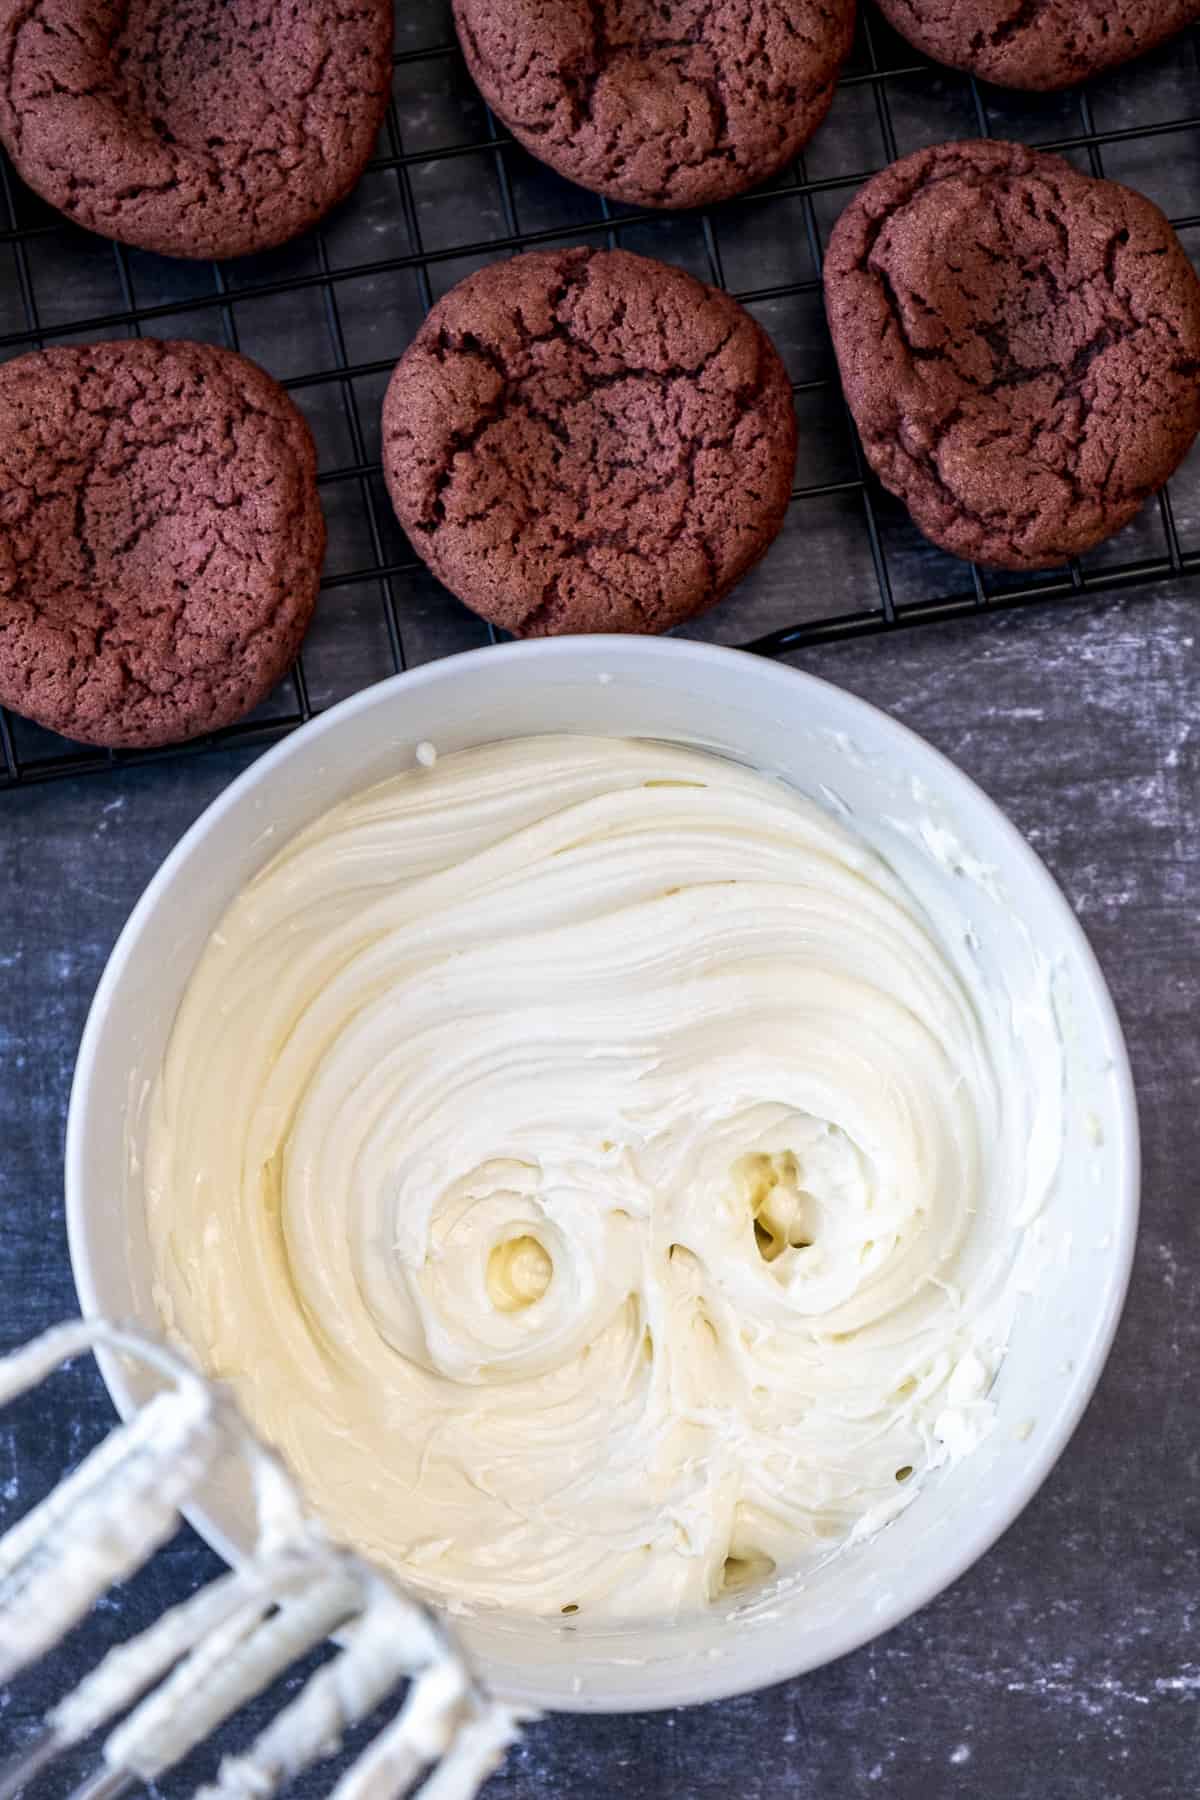 Cream cheese frosting in a bowl, electric mixer and baked red velvet cookies on the side.